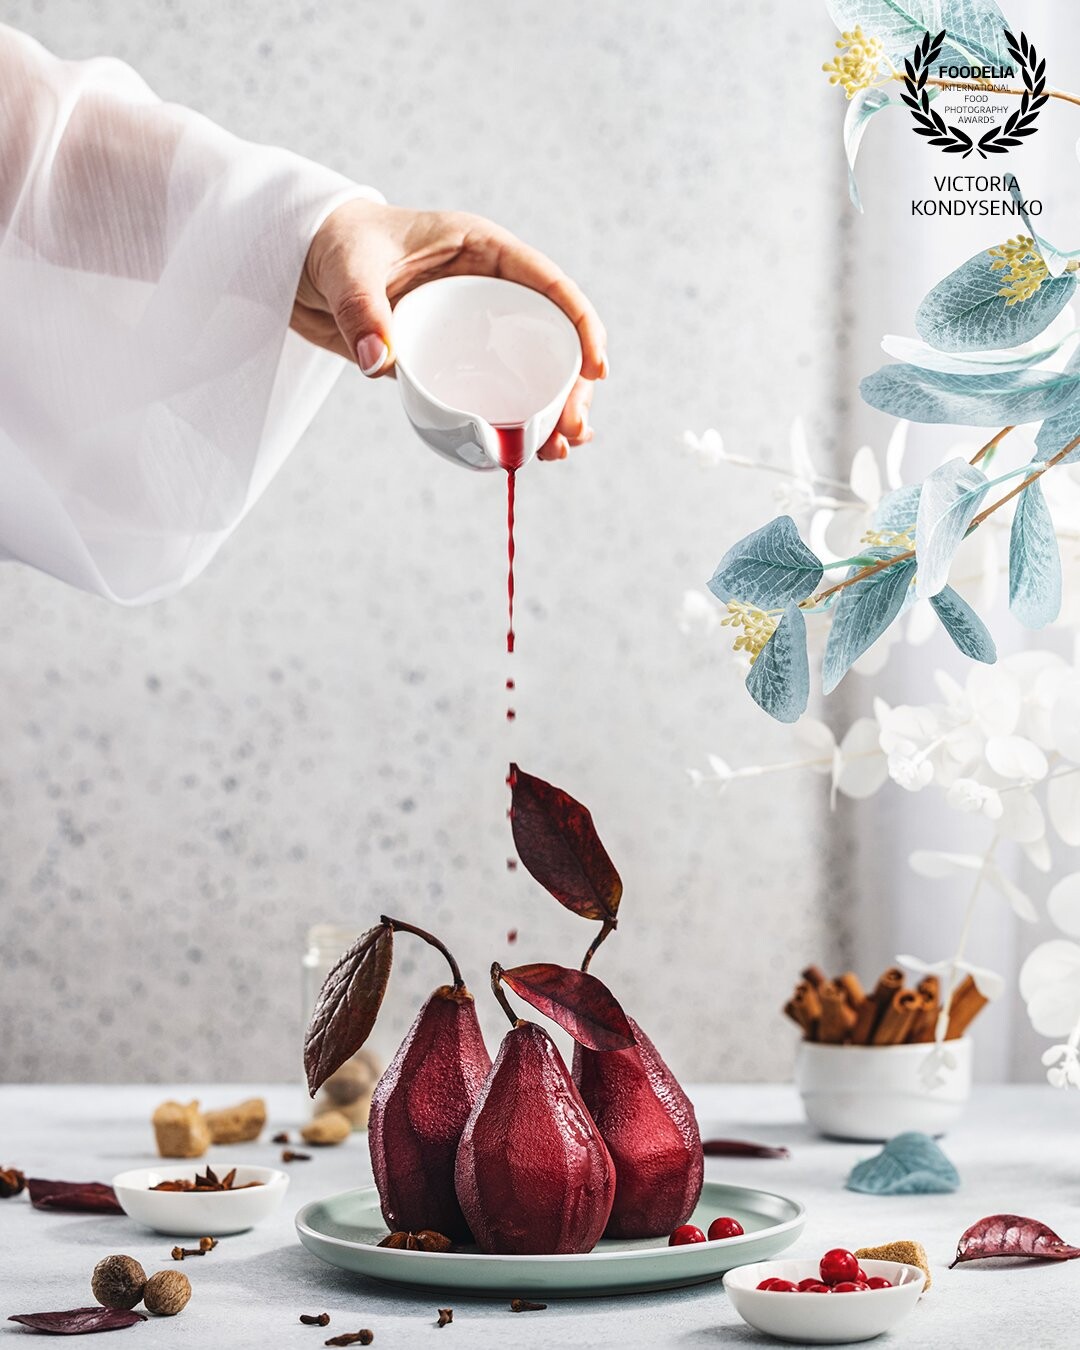 Red Wine Poached Pears are a classic French dessert<br />
It’s such a simple dessert, yet delightfully flavorful and very elegant and impressive. They have a great balance of sweet, spice and fruity flavors, and the deep red color turns this into a beautiful centerpiece dessert too.